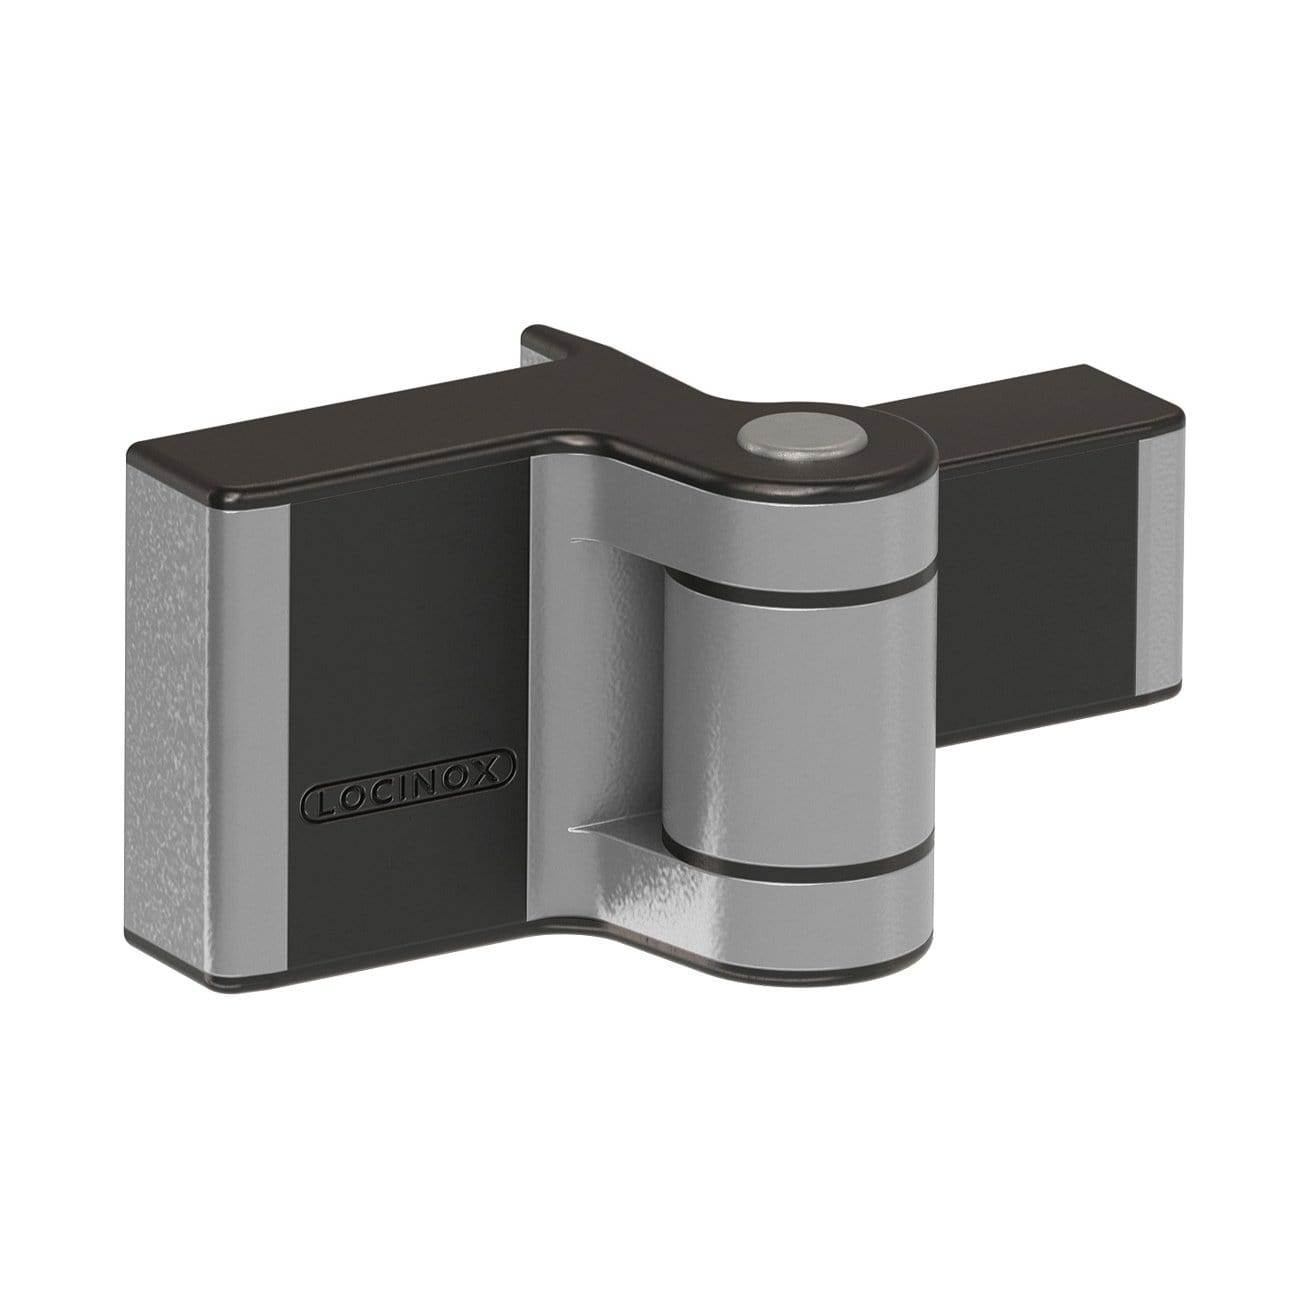 Locinox Puma - Compact 2-Way Adjustable 180° Surface Mounted Gate Hinges - For Gates Up To 132 Lb - Multiple Finishes Available - 2 Pack